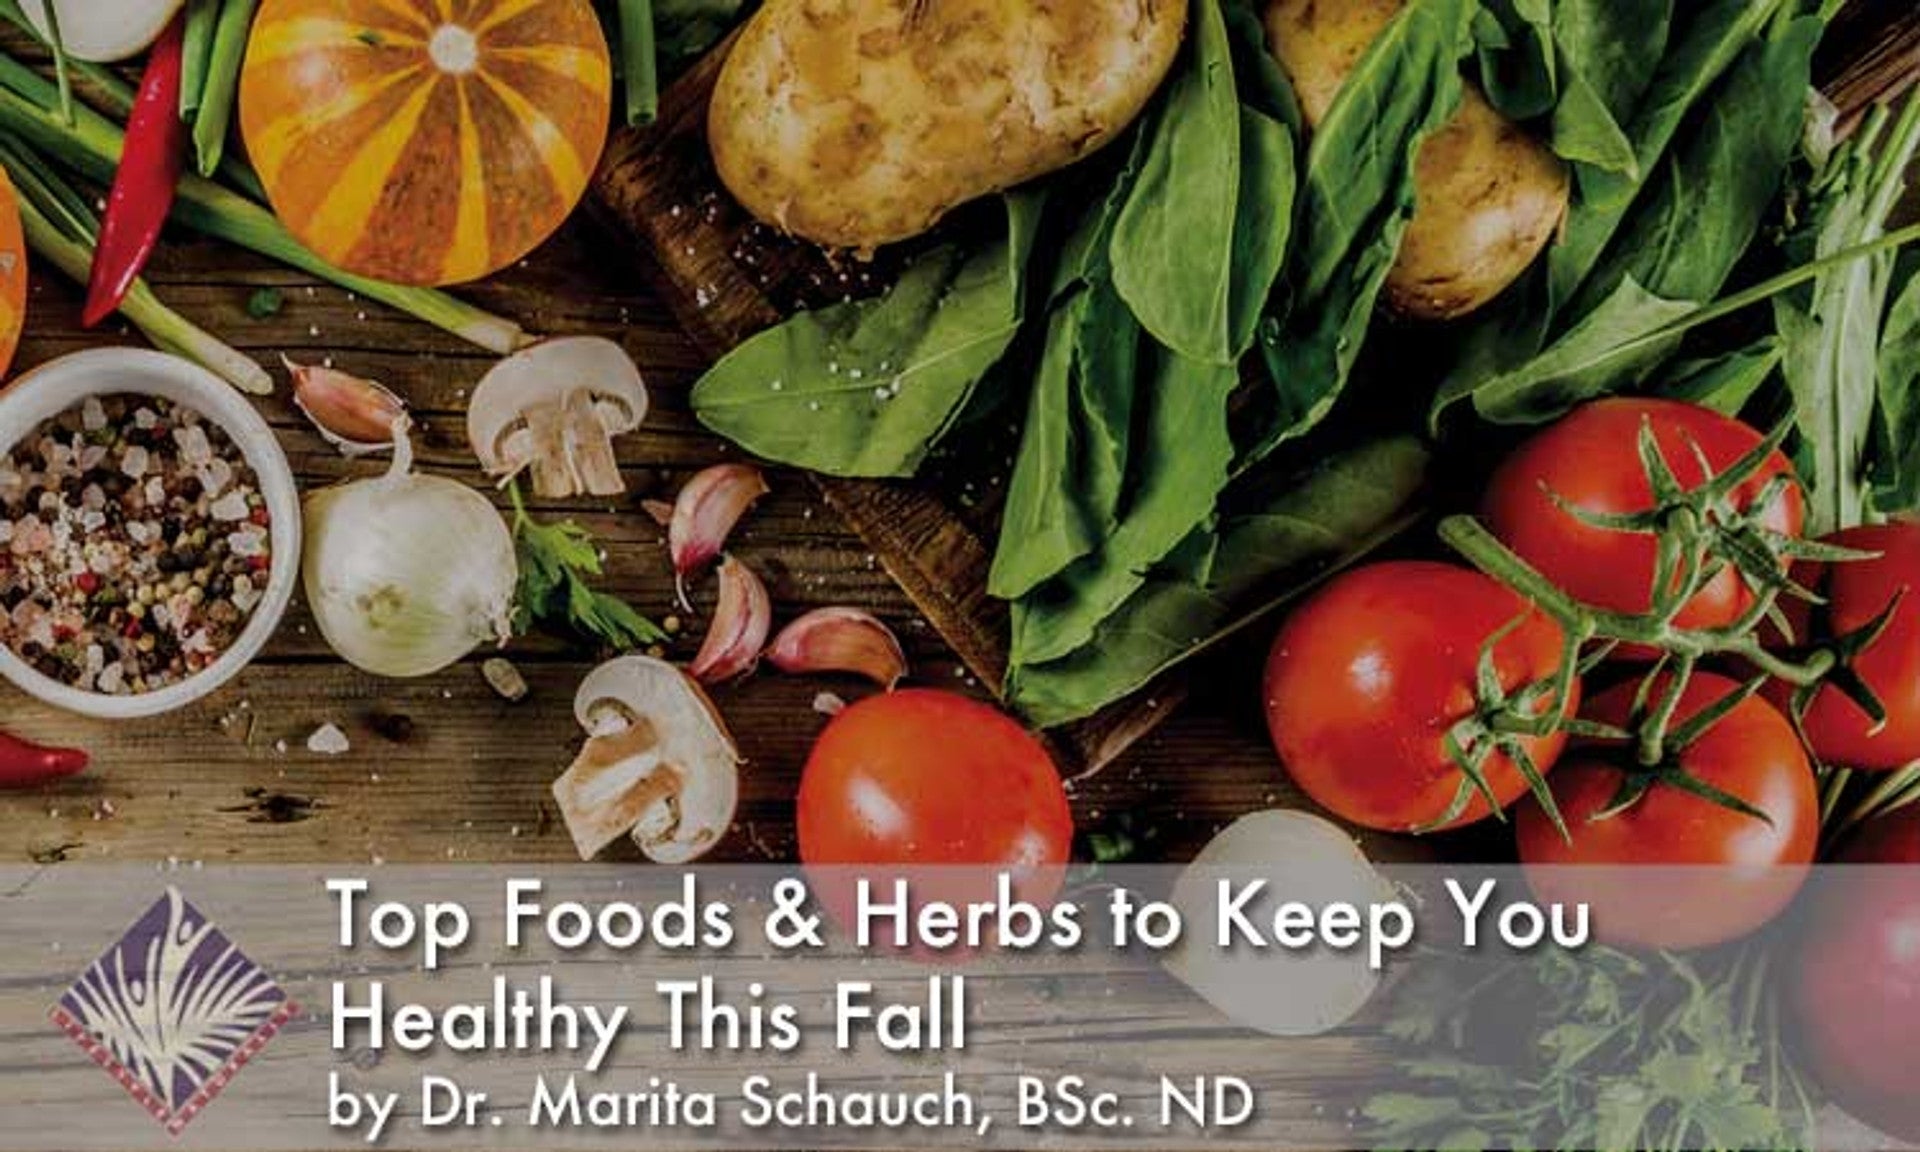 Top Foods & Herbs to Keep You Healthy This Fall